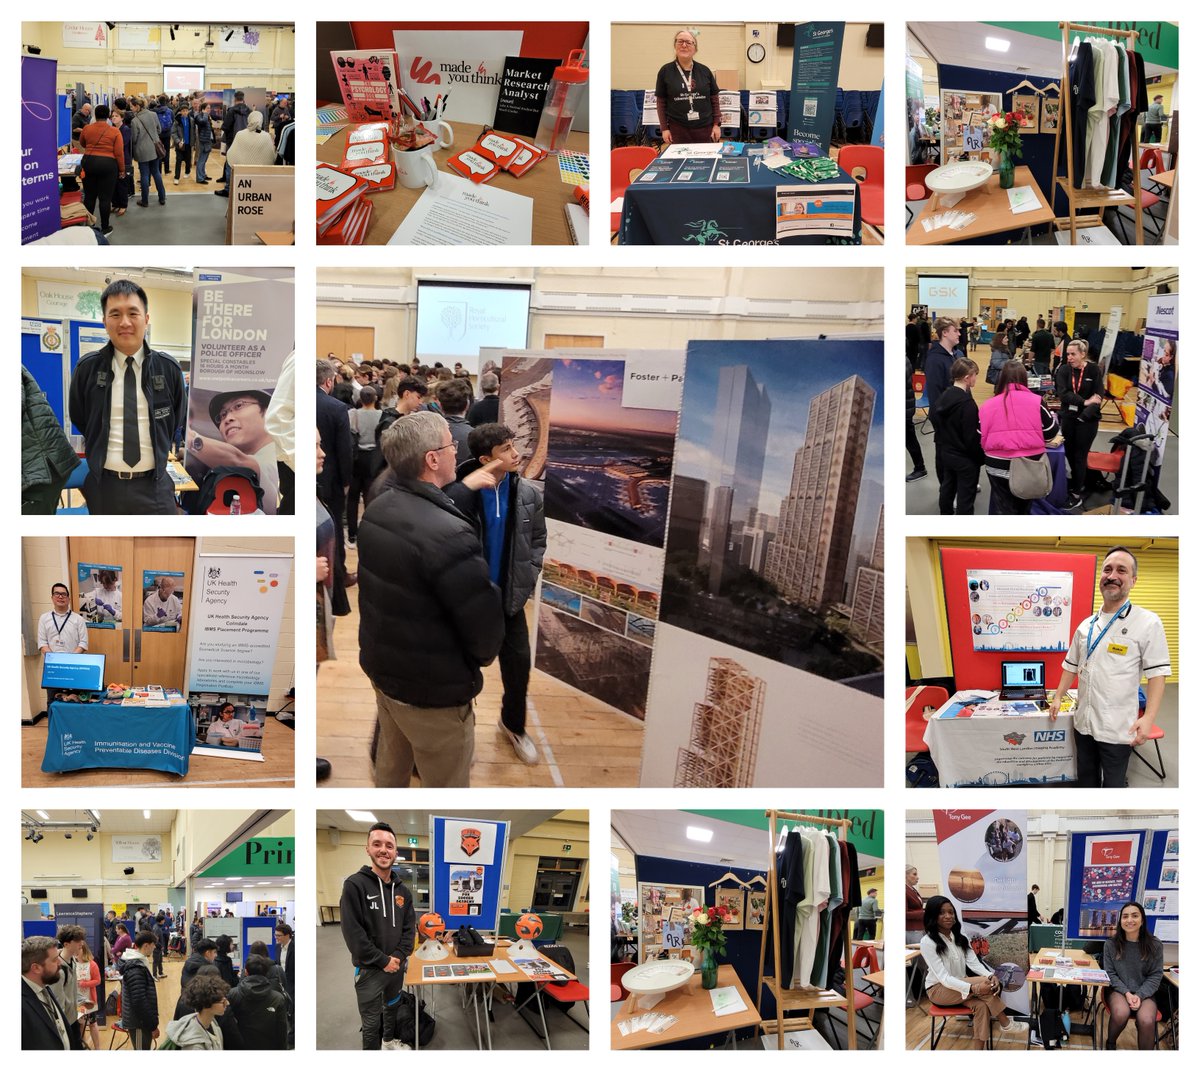 The Careers Fair was a huge success last night with over 300 students + accompanying parents through the door. Thank you to all the amazing employers, universities, and colleges who gave up their time to attend, inspiring our young people and expanding their #WorldOfOpportunity.